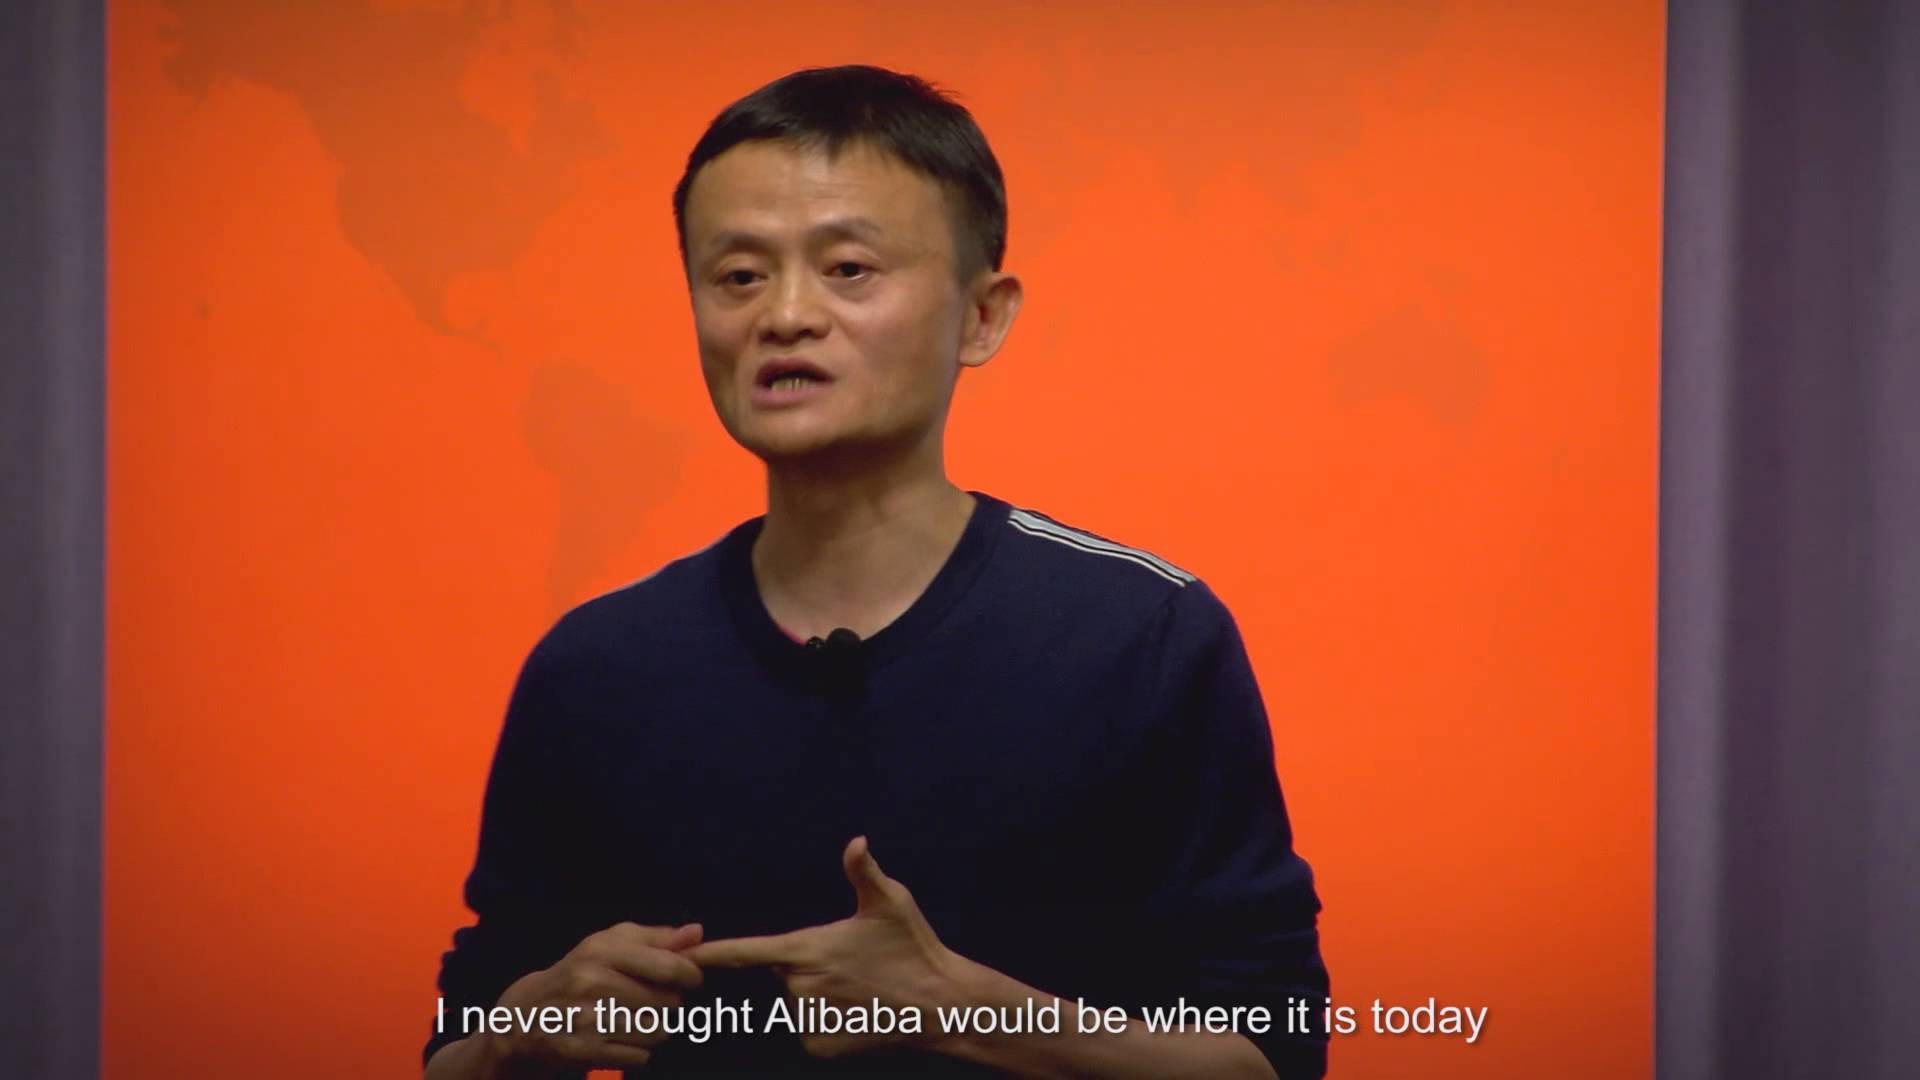 Jack Ma apparently returns to China, according to local news